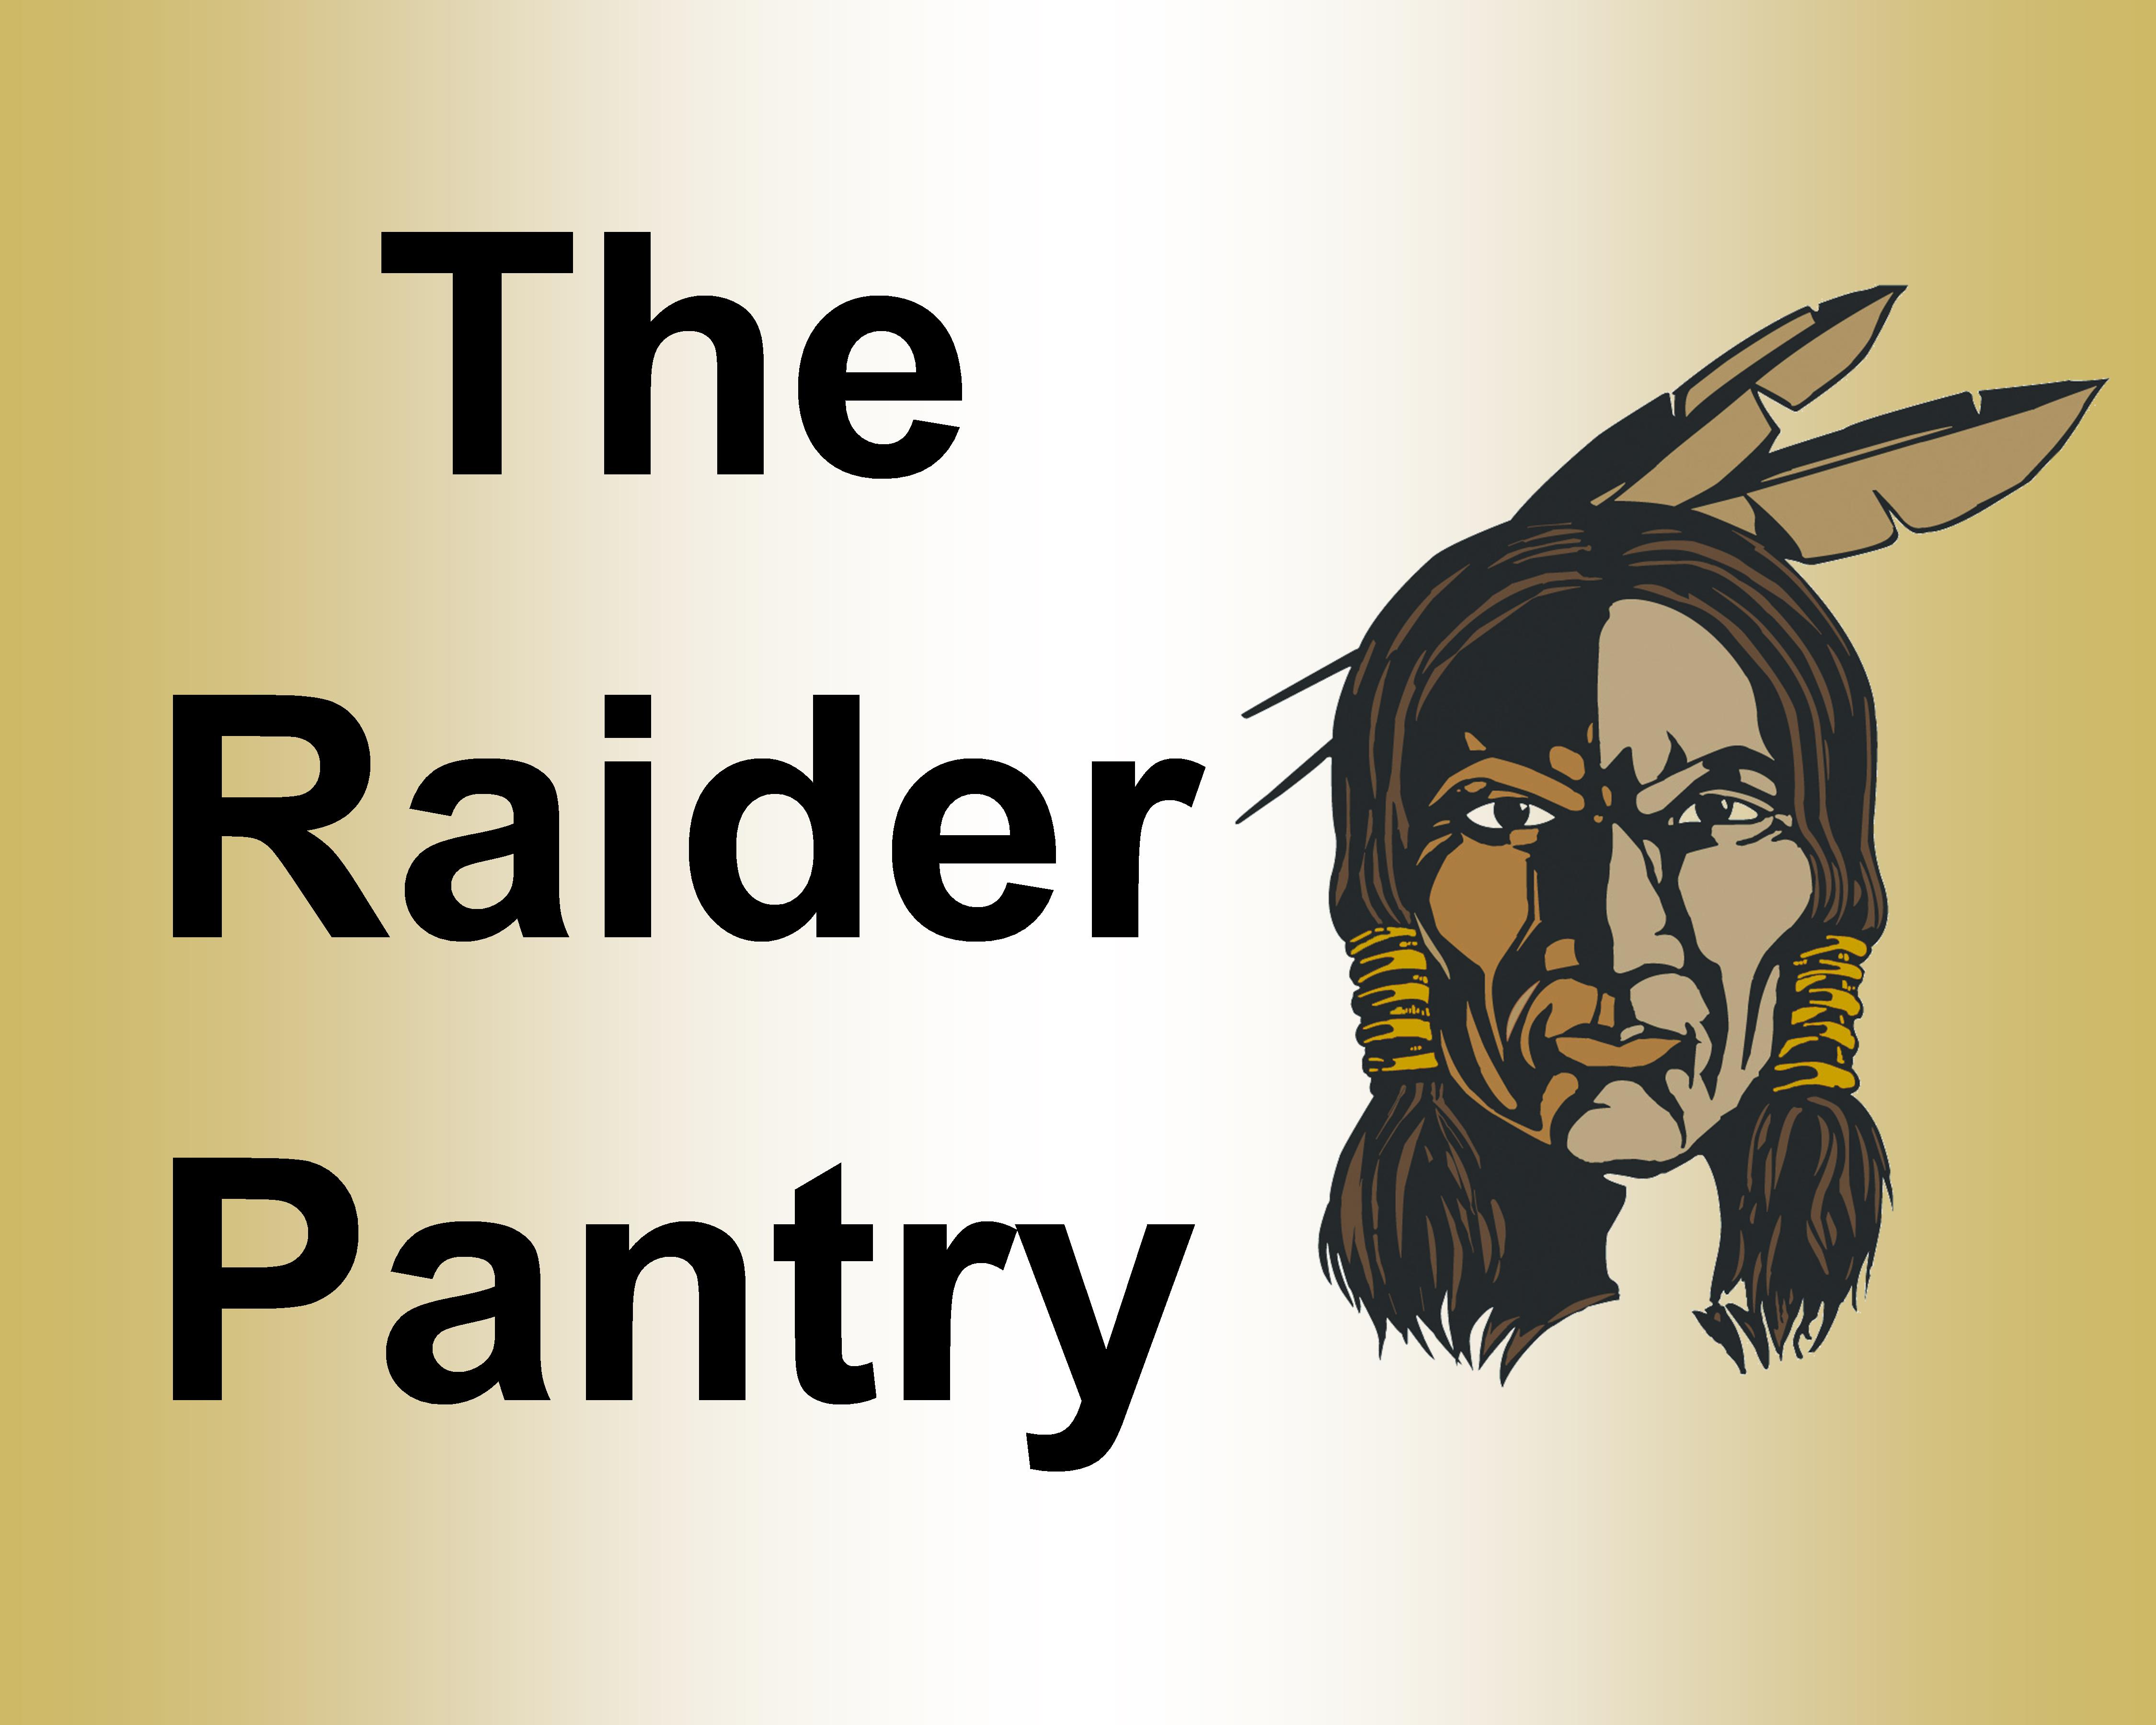 Raider Pantry Sign in Black, Gold, and White.